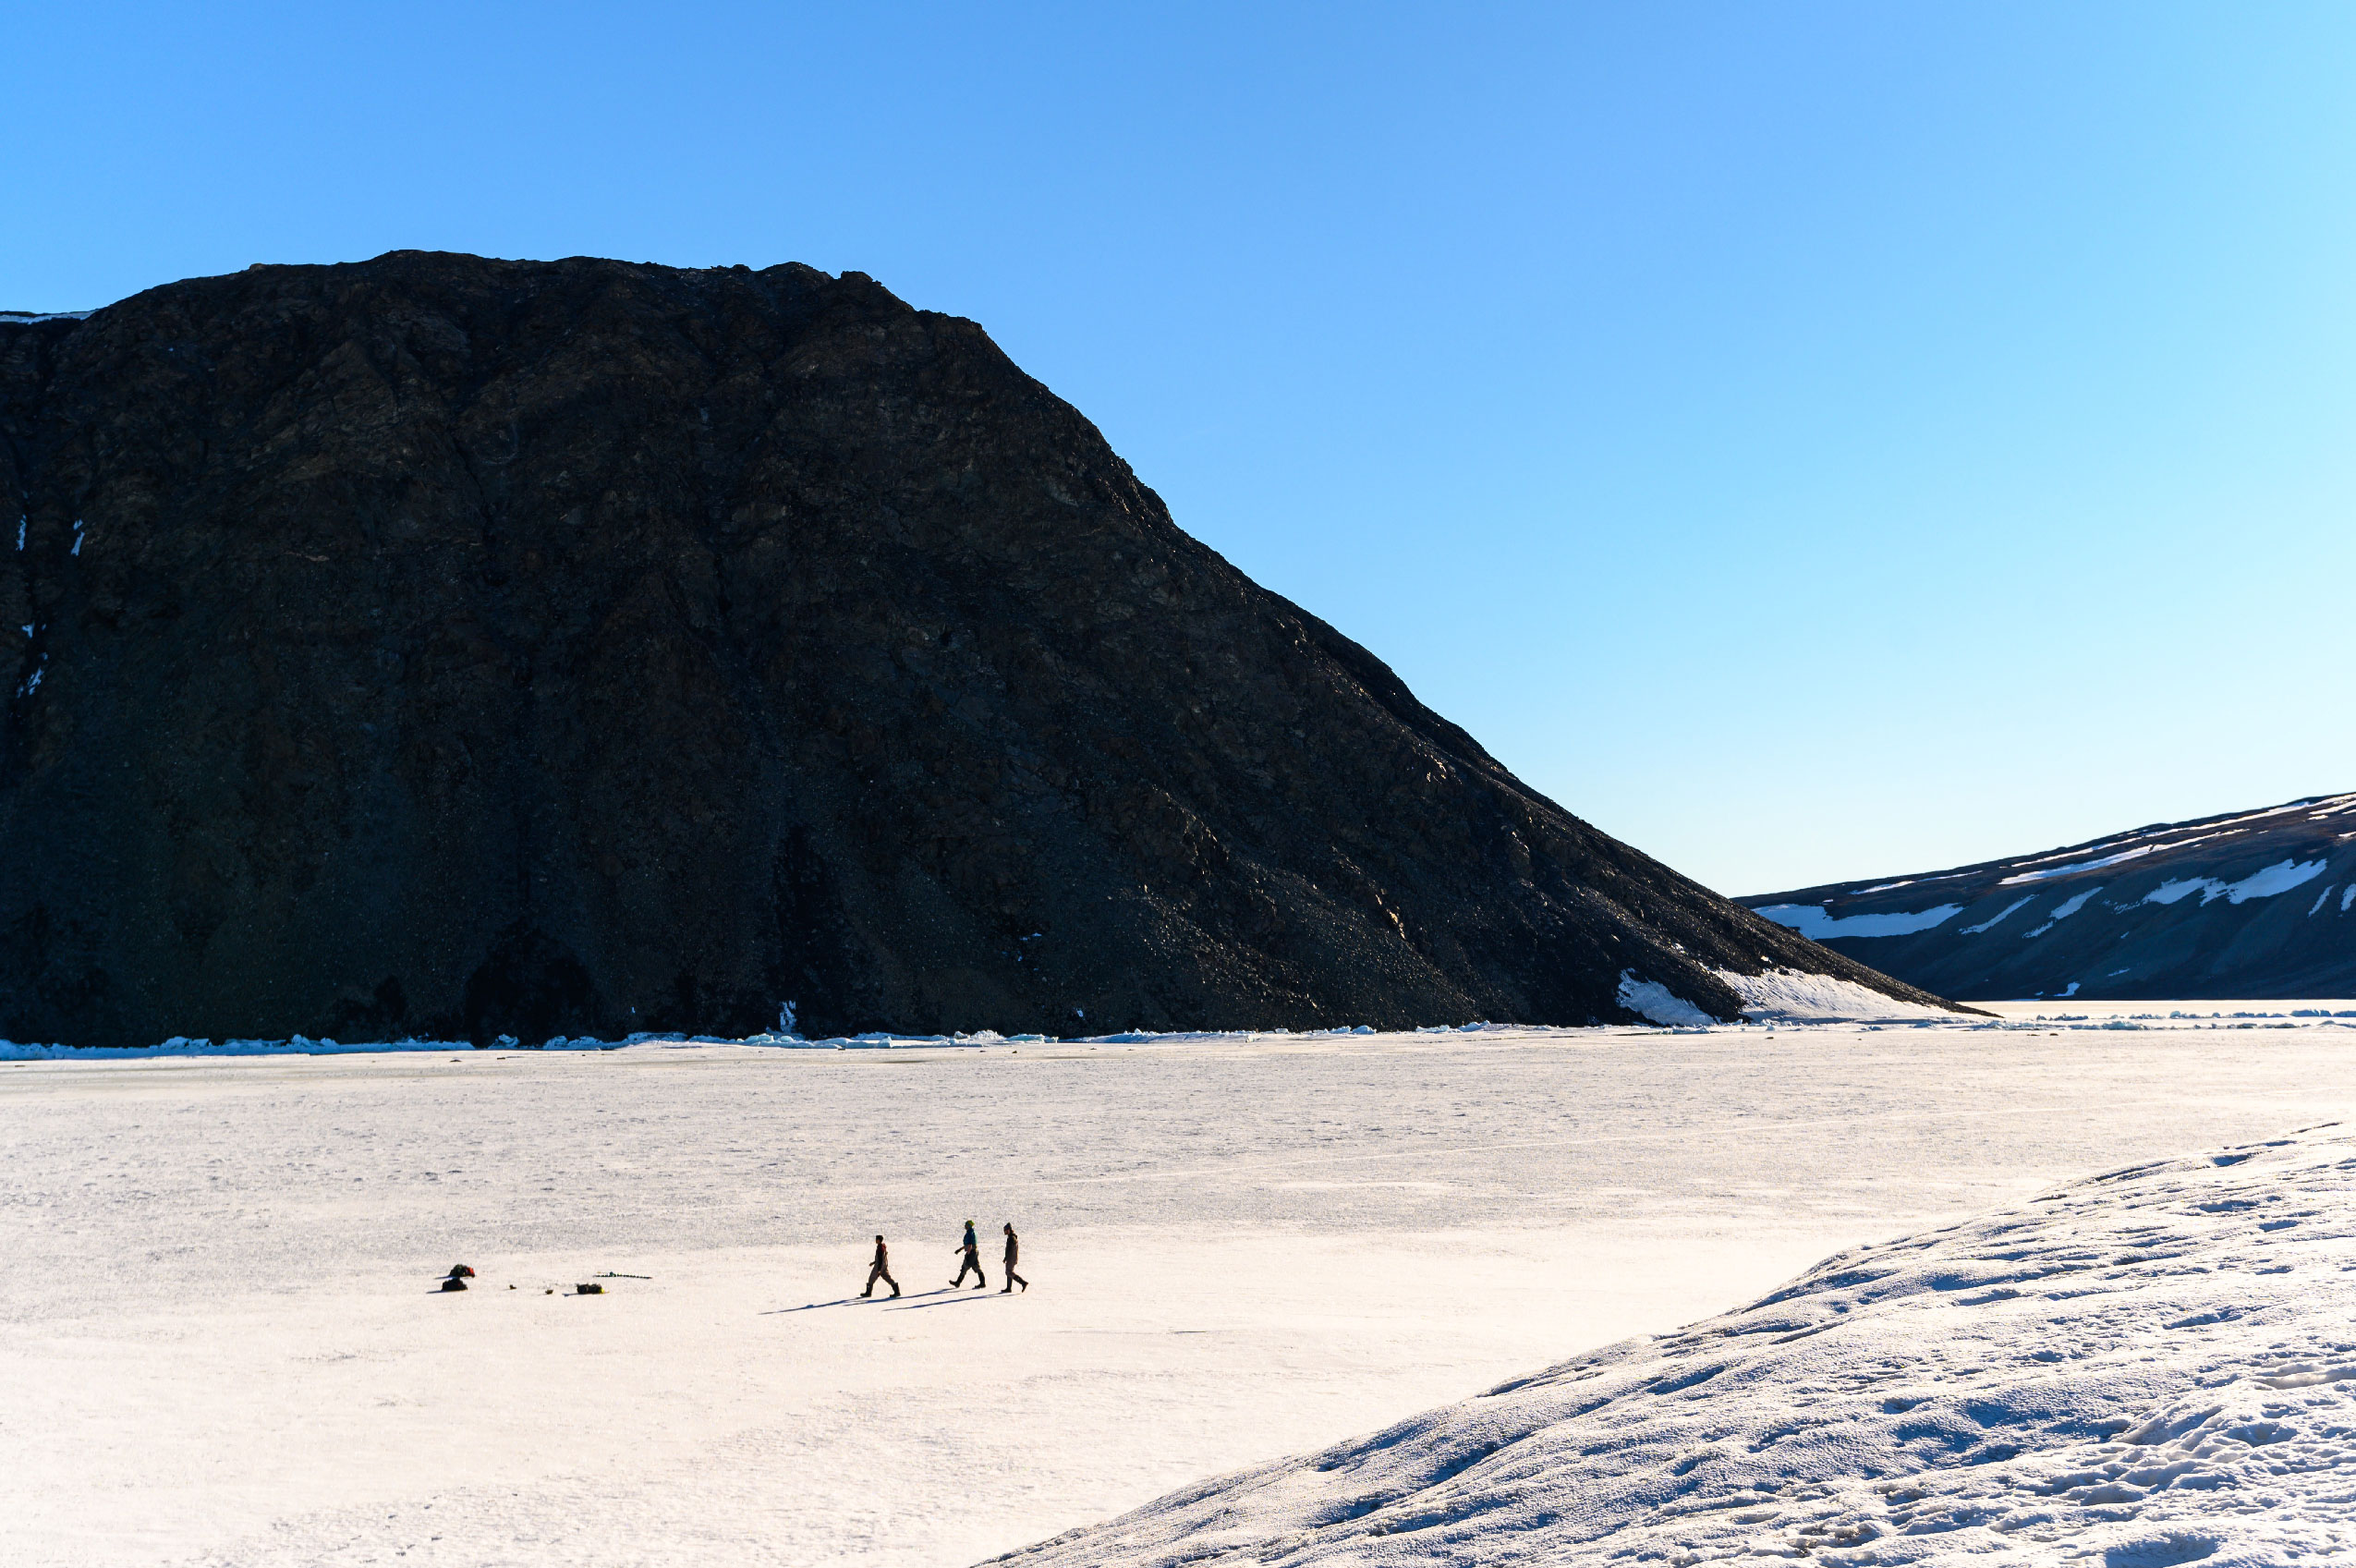 Three people walking on ice shelf and the glacial tongue in the foreground with a large rock formation behind them.